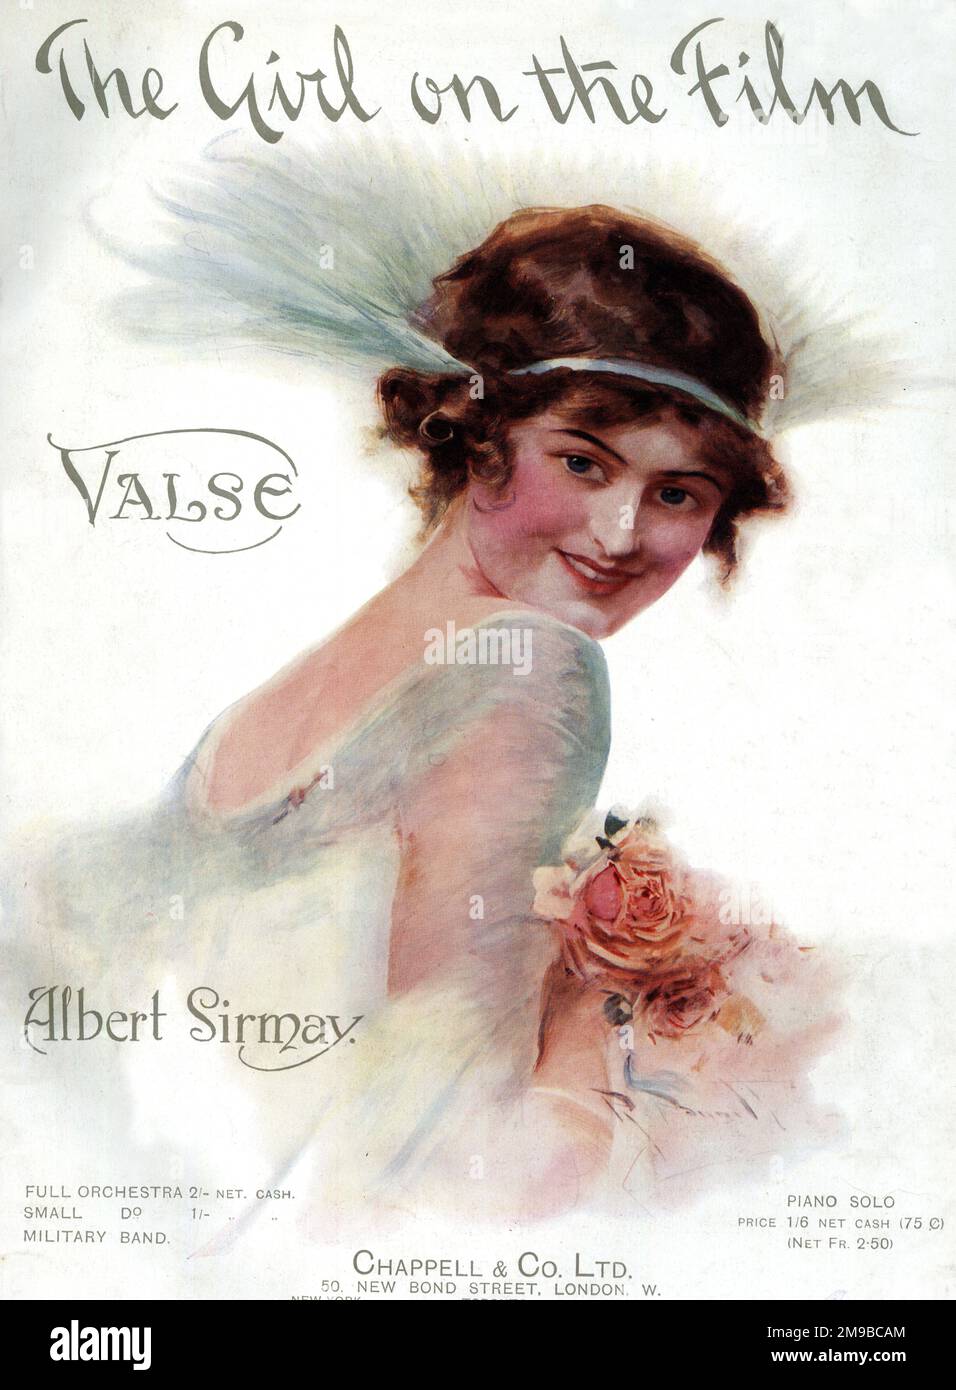 Music cover, The Girl on the Film, Valse, by Albert Sirmay, Gaiety Theatre Musical Play, London Stock Photo